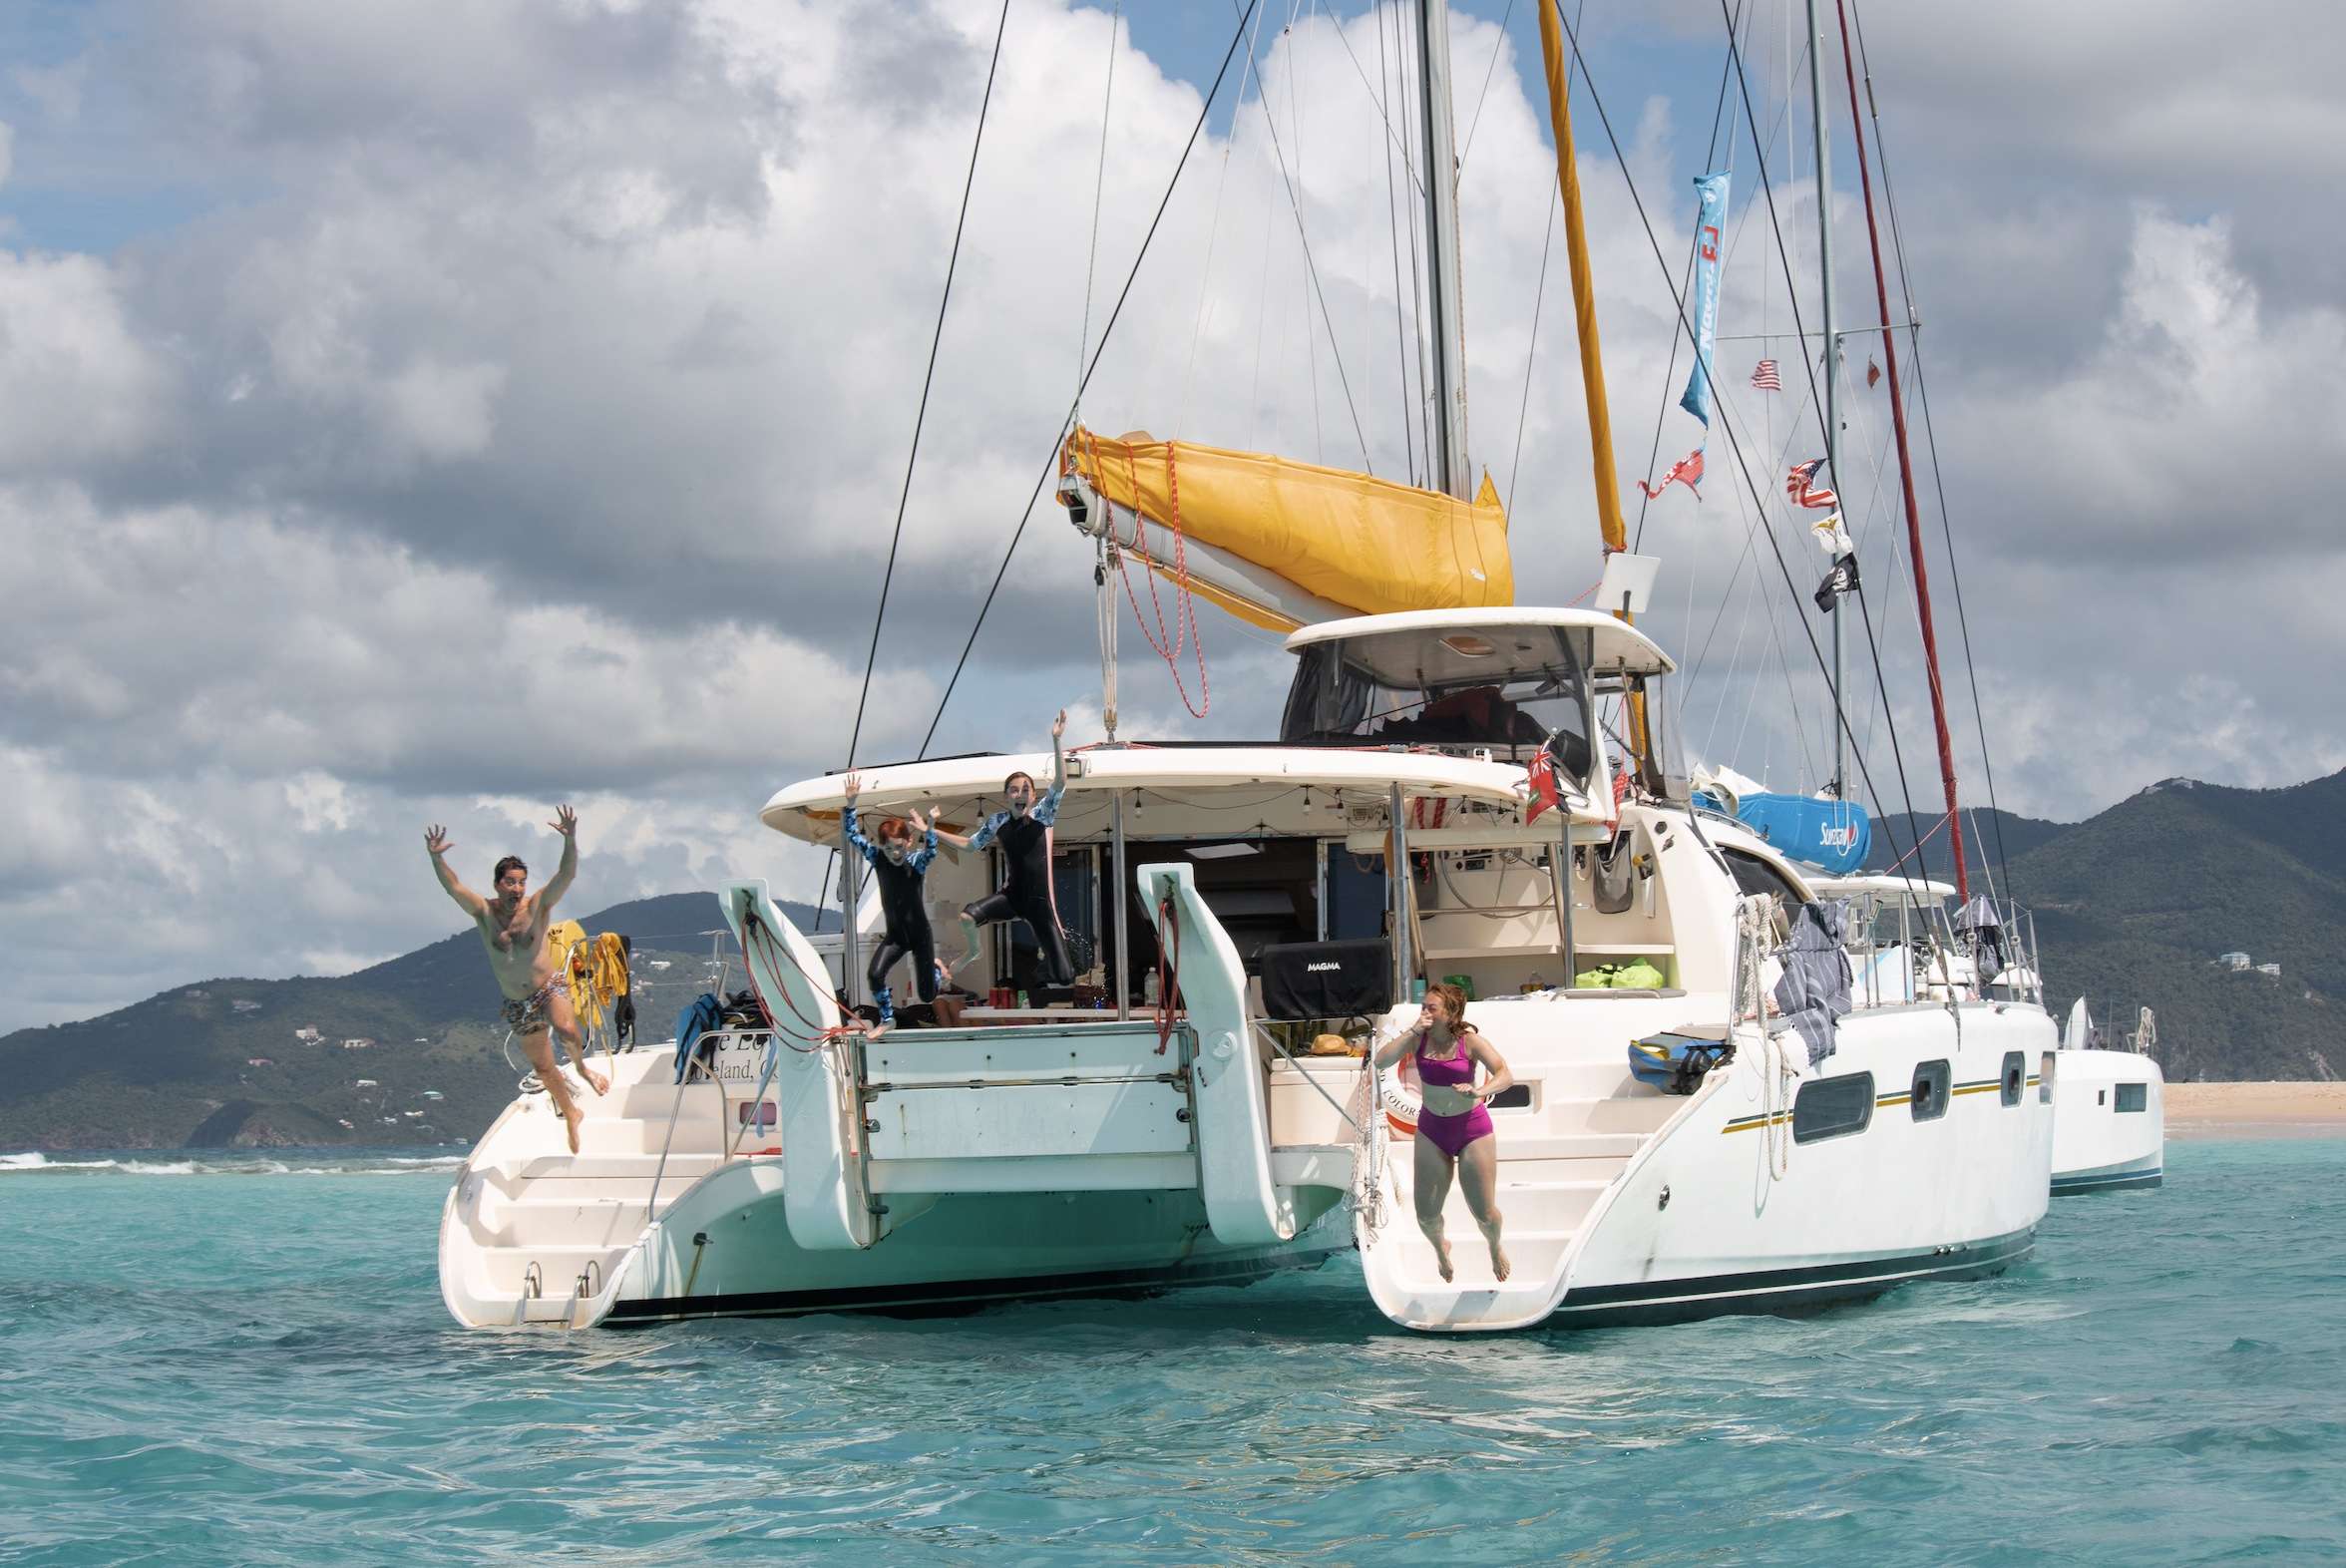 ONE LOVE Yacht Charter - Water toys and activities